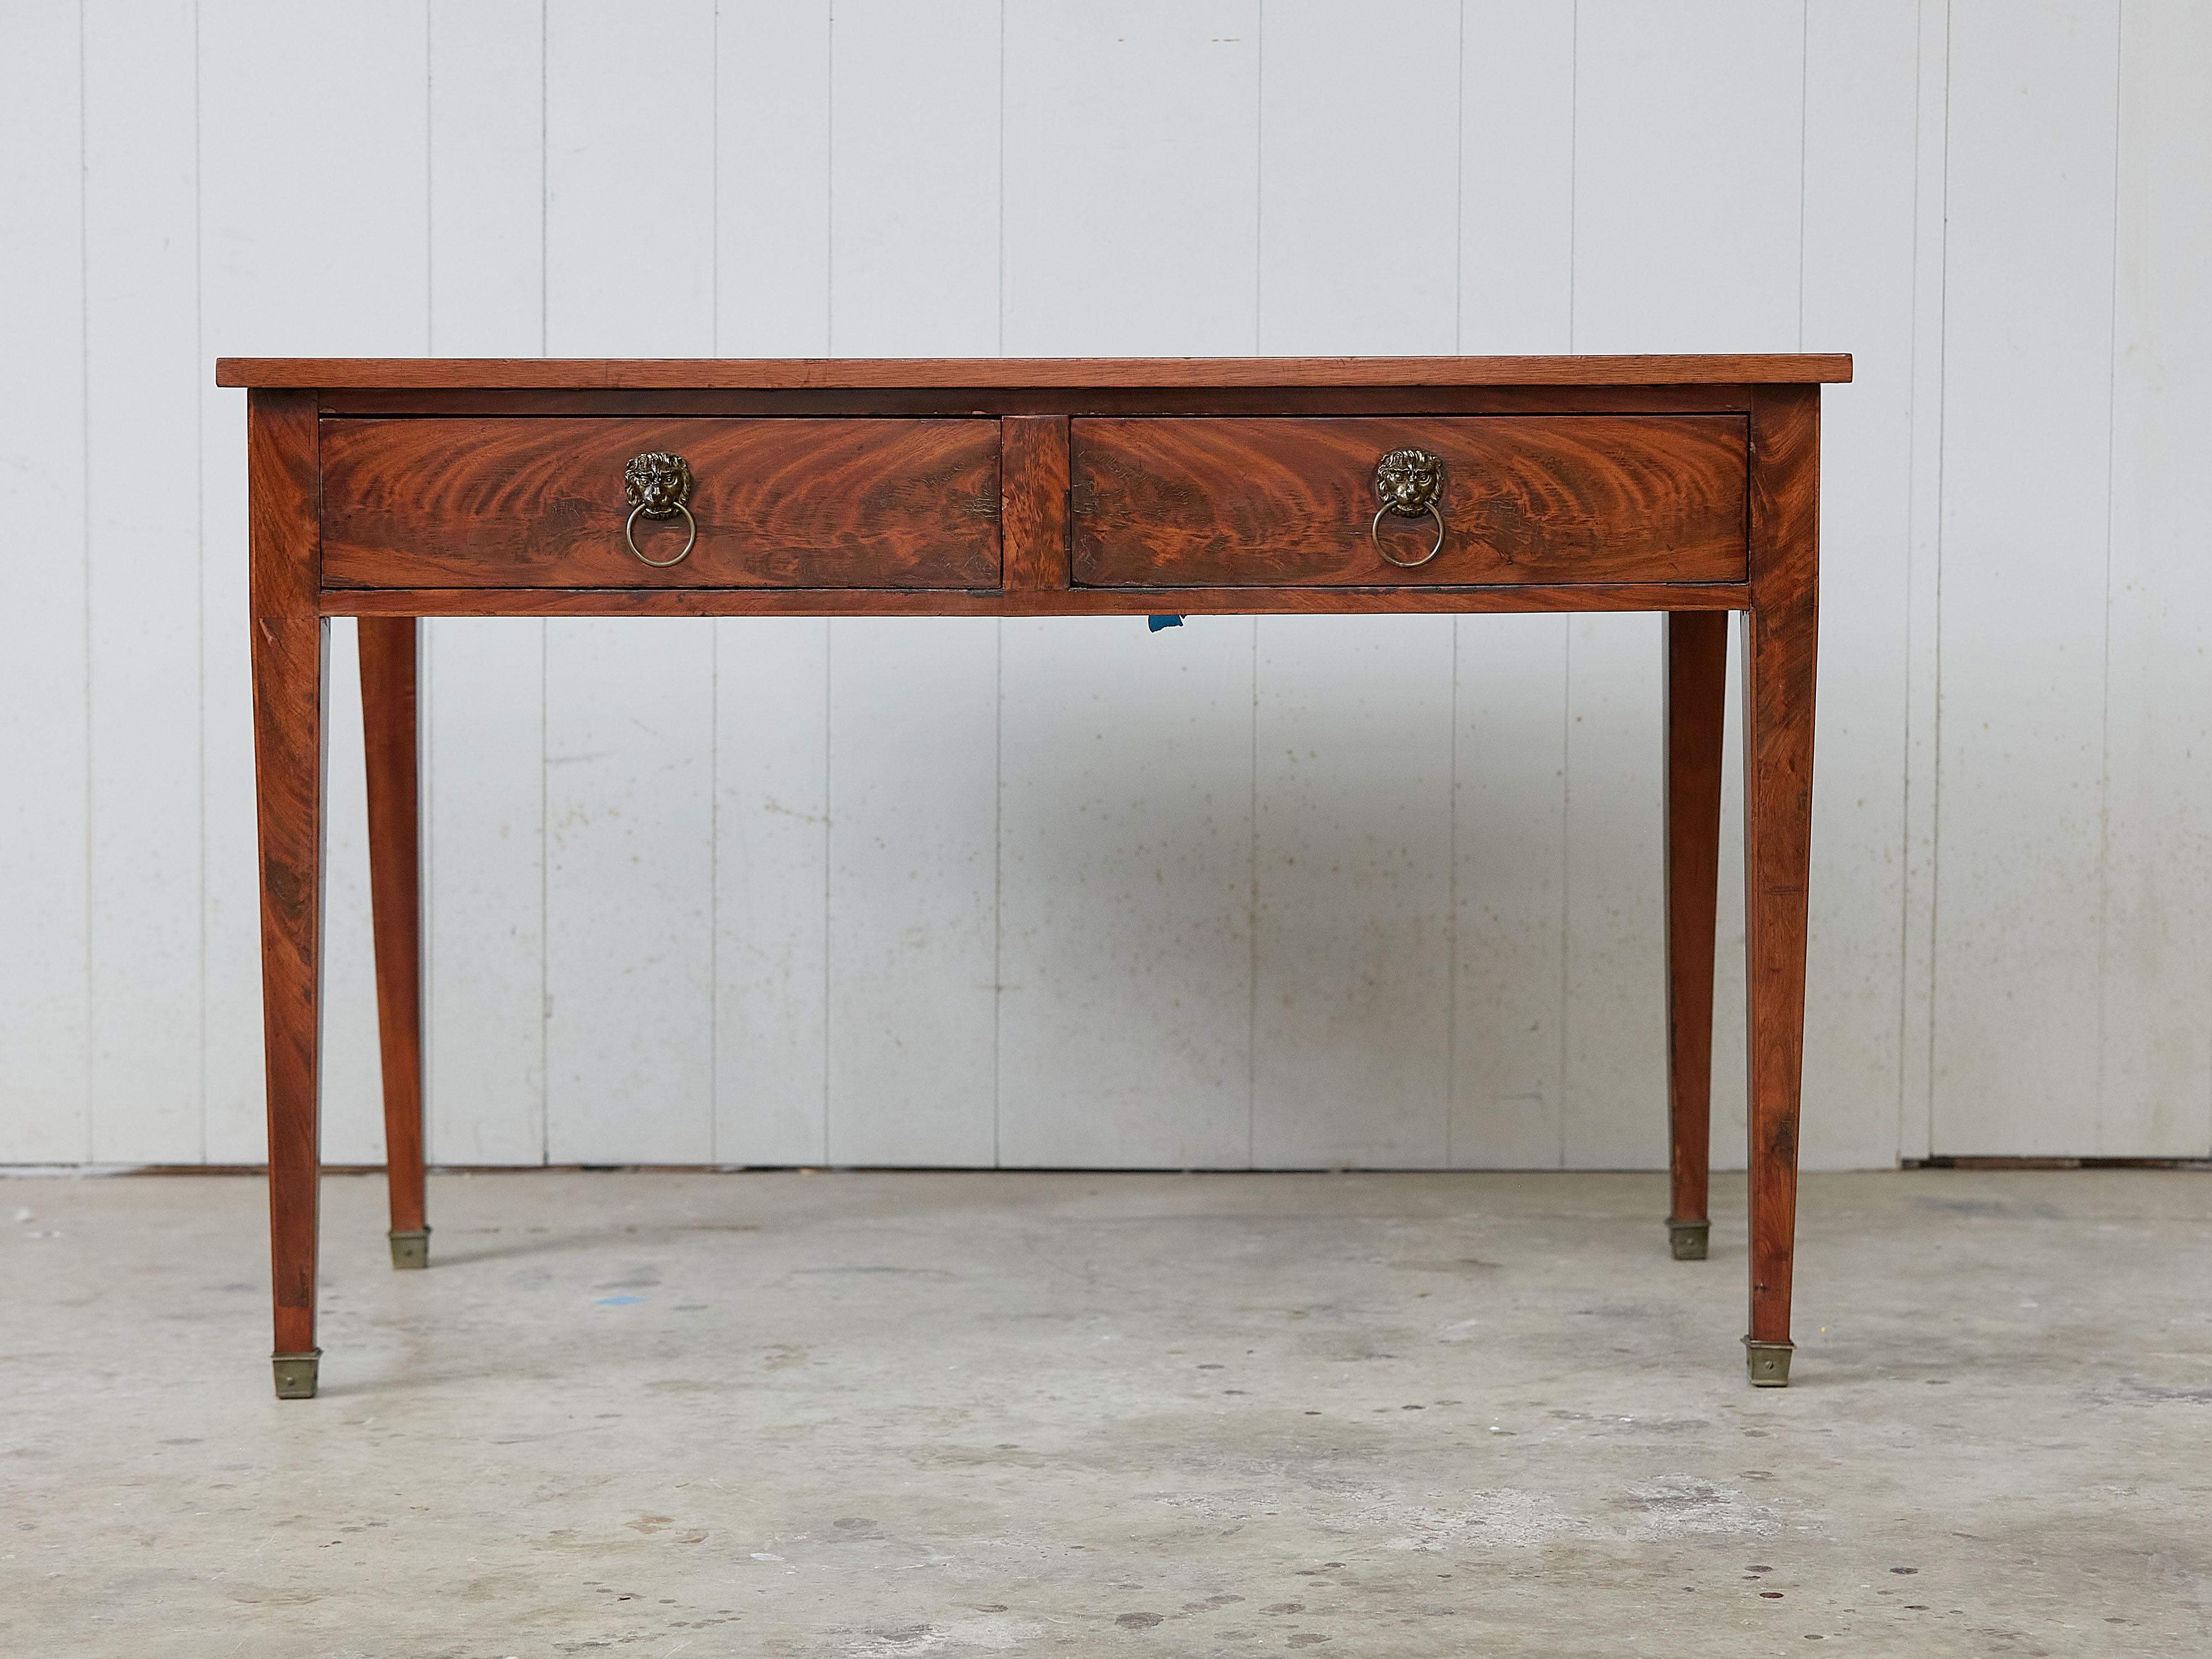 A French walnut desk from the 19th century, with leather top, two drawers and lion ring pulls. Created in France during the 19th century, this walnut desk features a rectangular top with black leather insert, sitting above two drawers fitted with